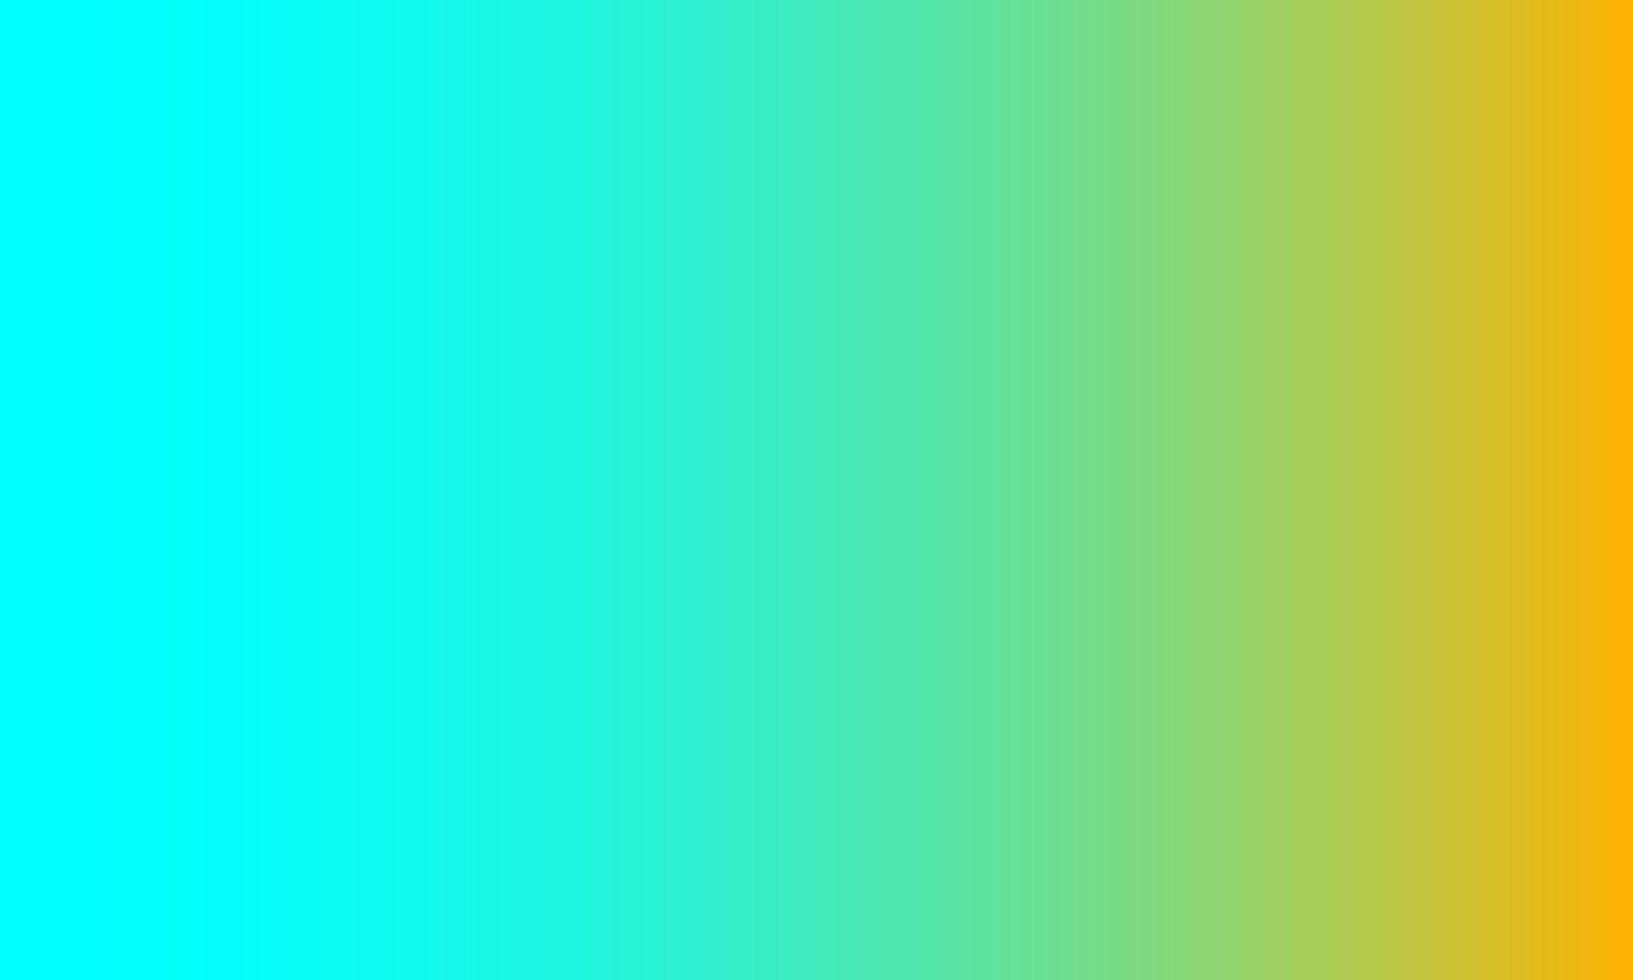 gradient patel blue and pastel orange. abstract, colorful, simple, cheerful and clean style. suitable for copy space, wallpaper, background, texture, banner, flyer or decor vector